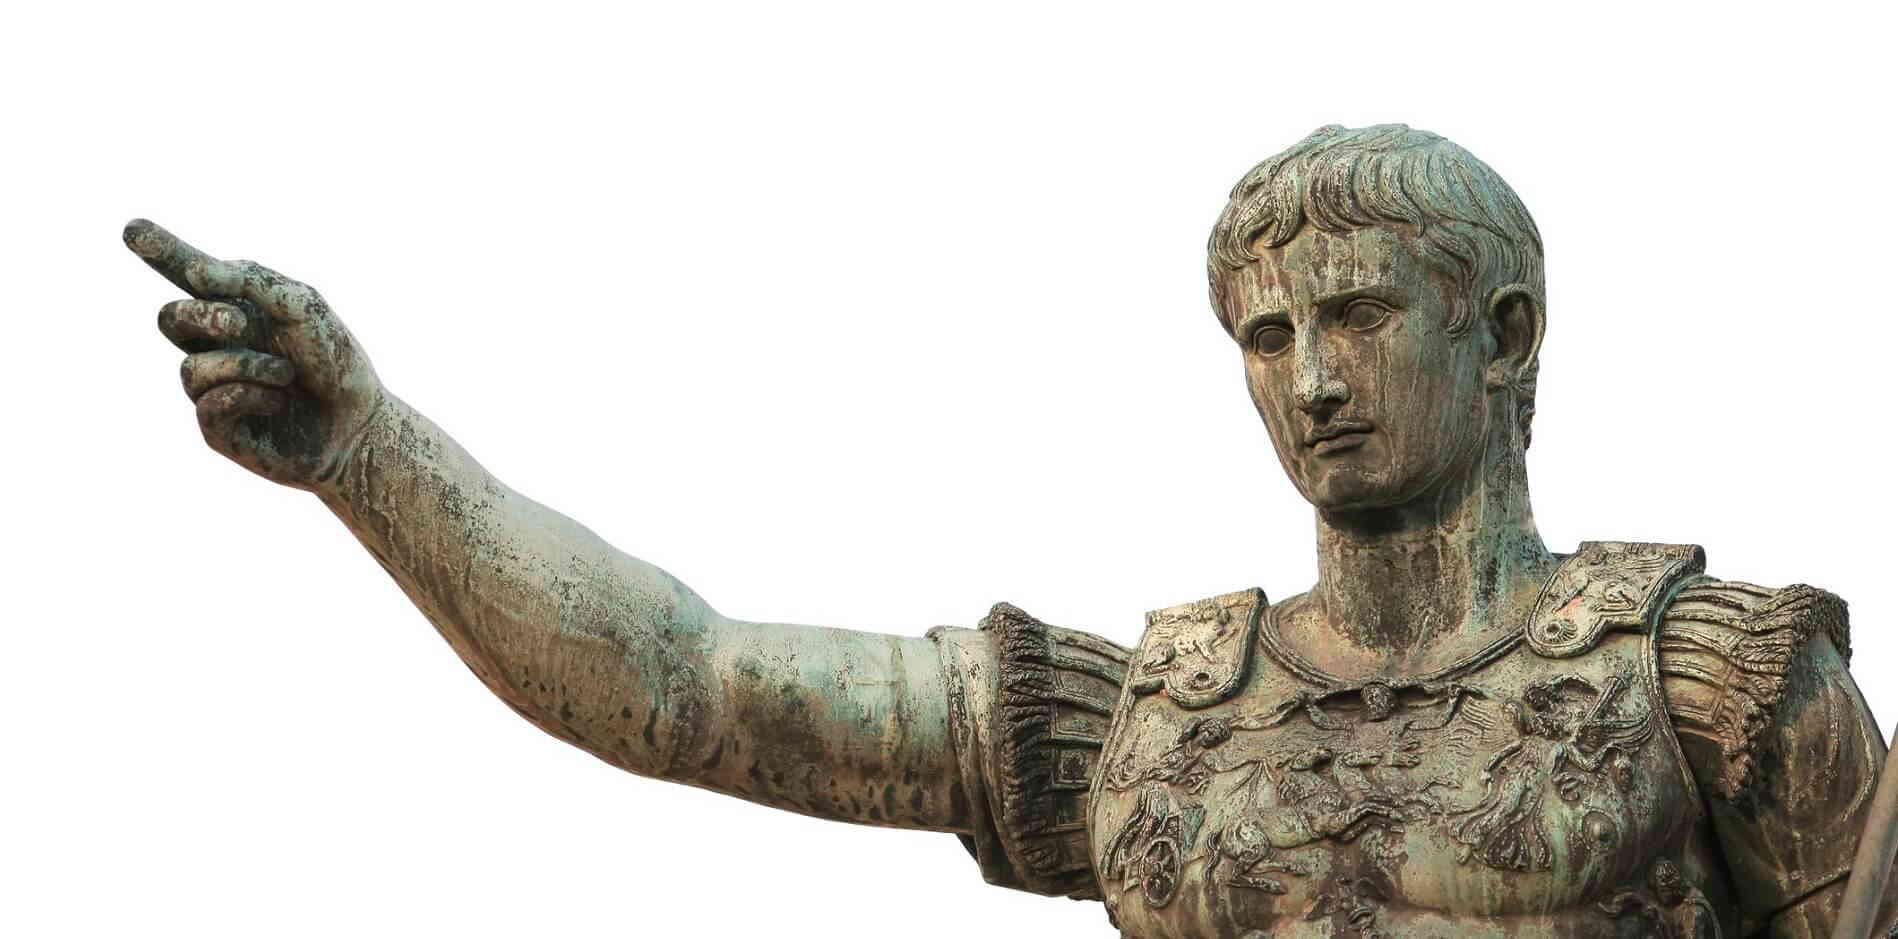 Who was the first emperor of Rome?